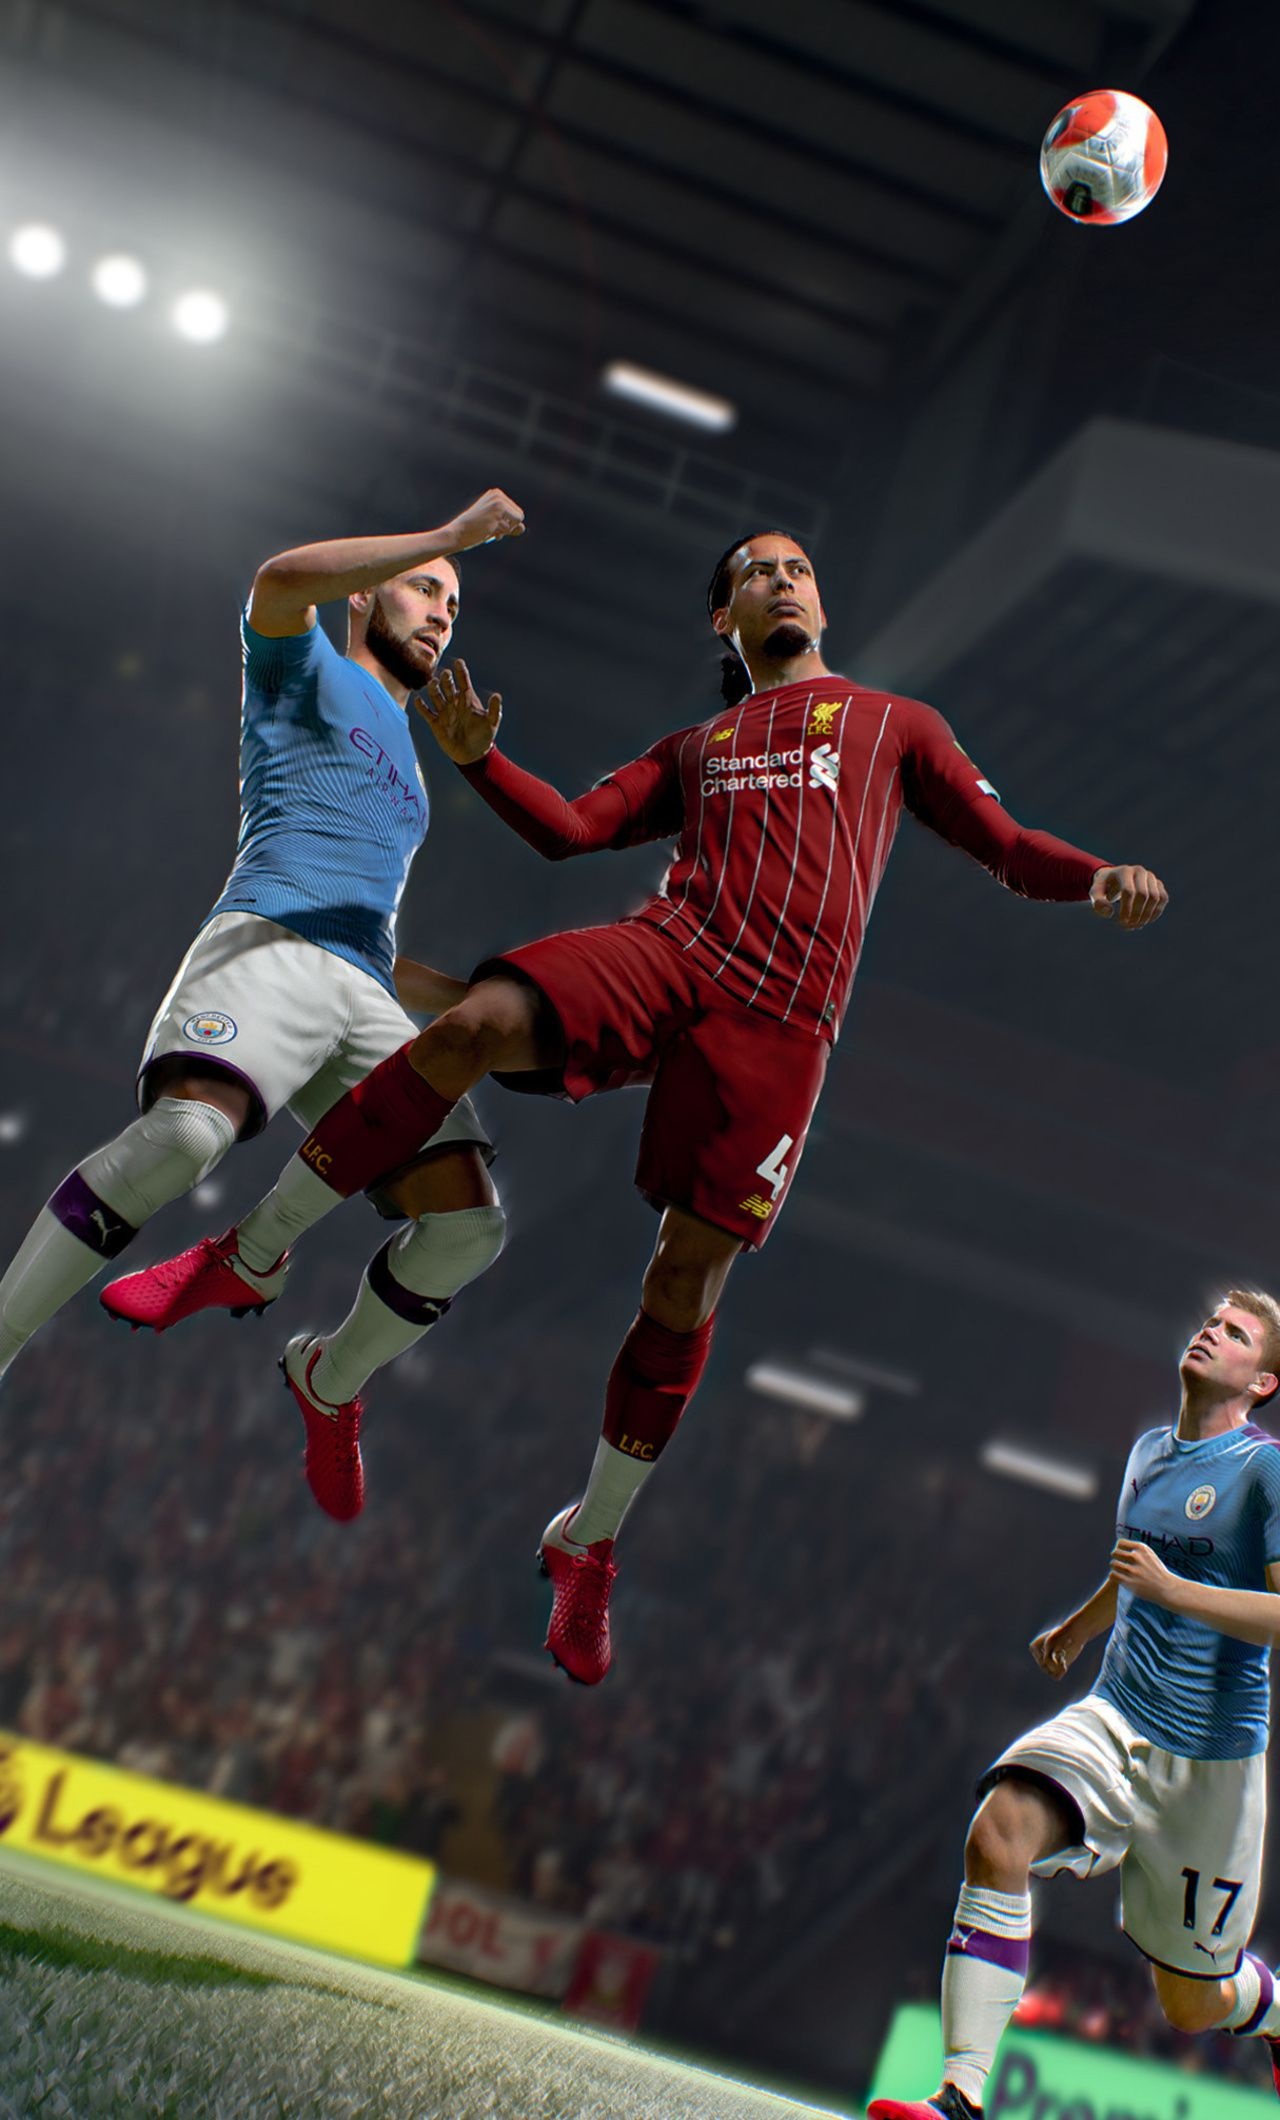 FIFA Soccer, High-octane action, Jaw-dropping visuals, Game of passion, 1280x2120 HD Phone